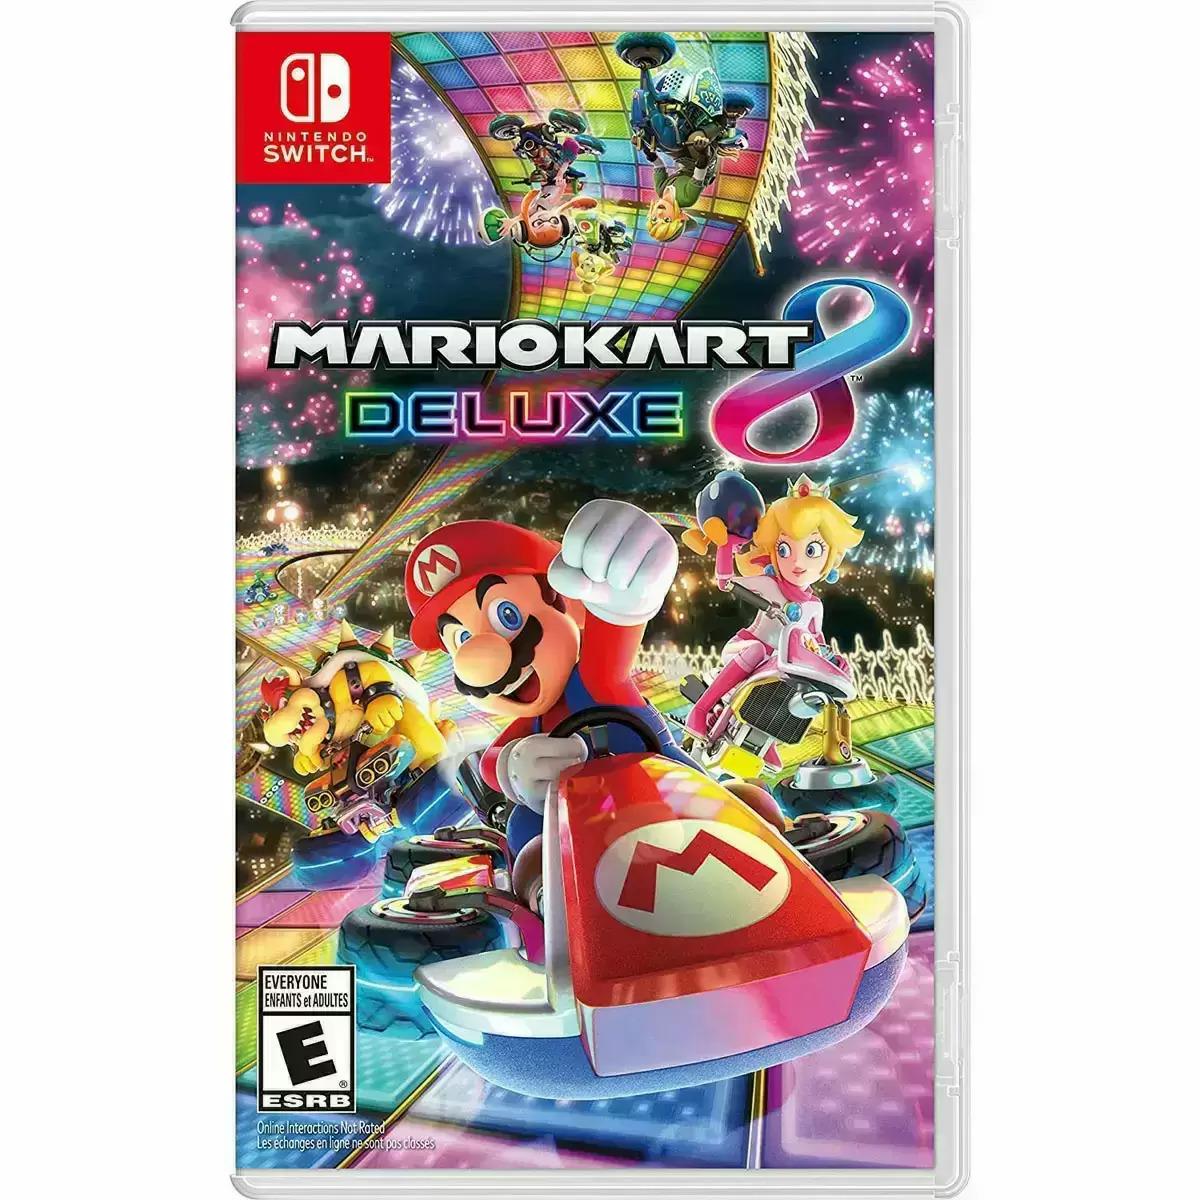 Mario Kart 8 Deluxe Nintendo Switch for $38.99 Shipped